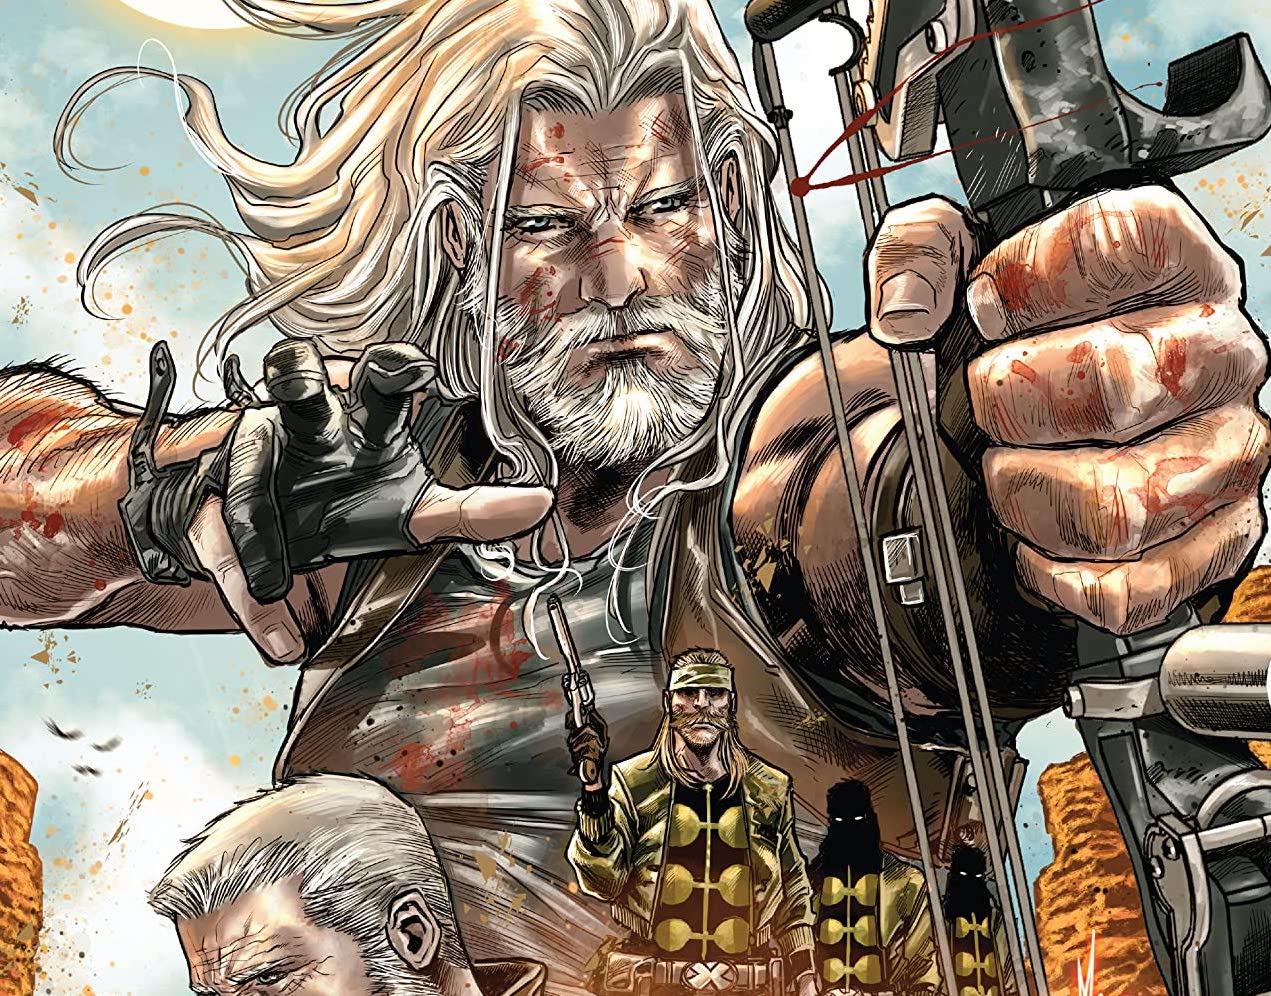 Old Man Hawkeye: The Complete Collection